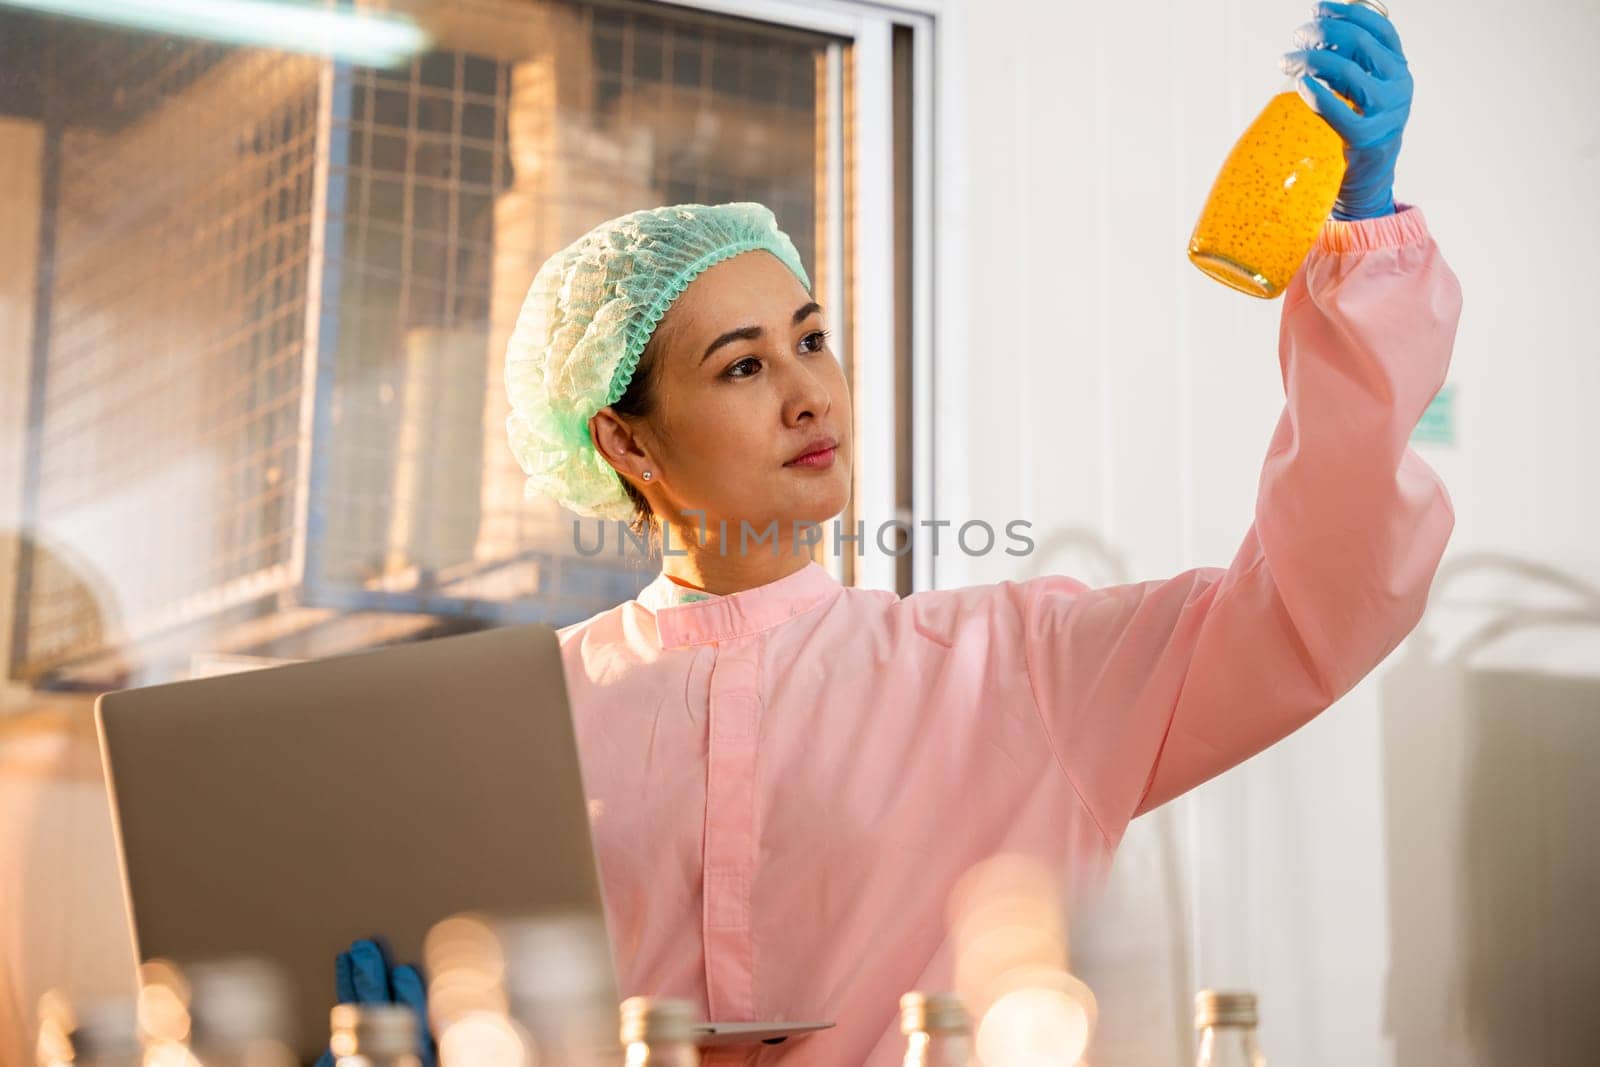 Quality inspector a woman carefully examines beverage bottles on a conveyor by Sorapop